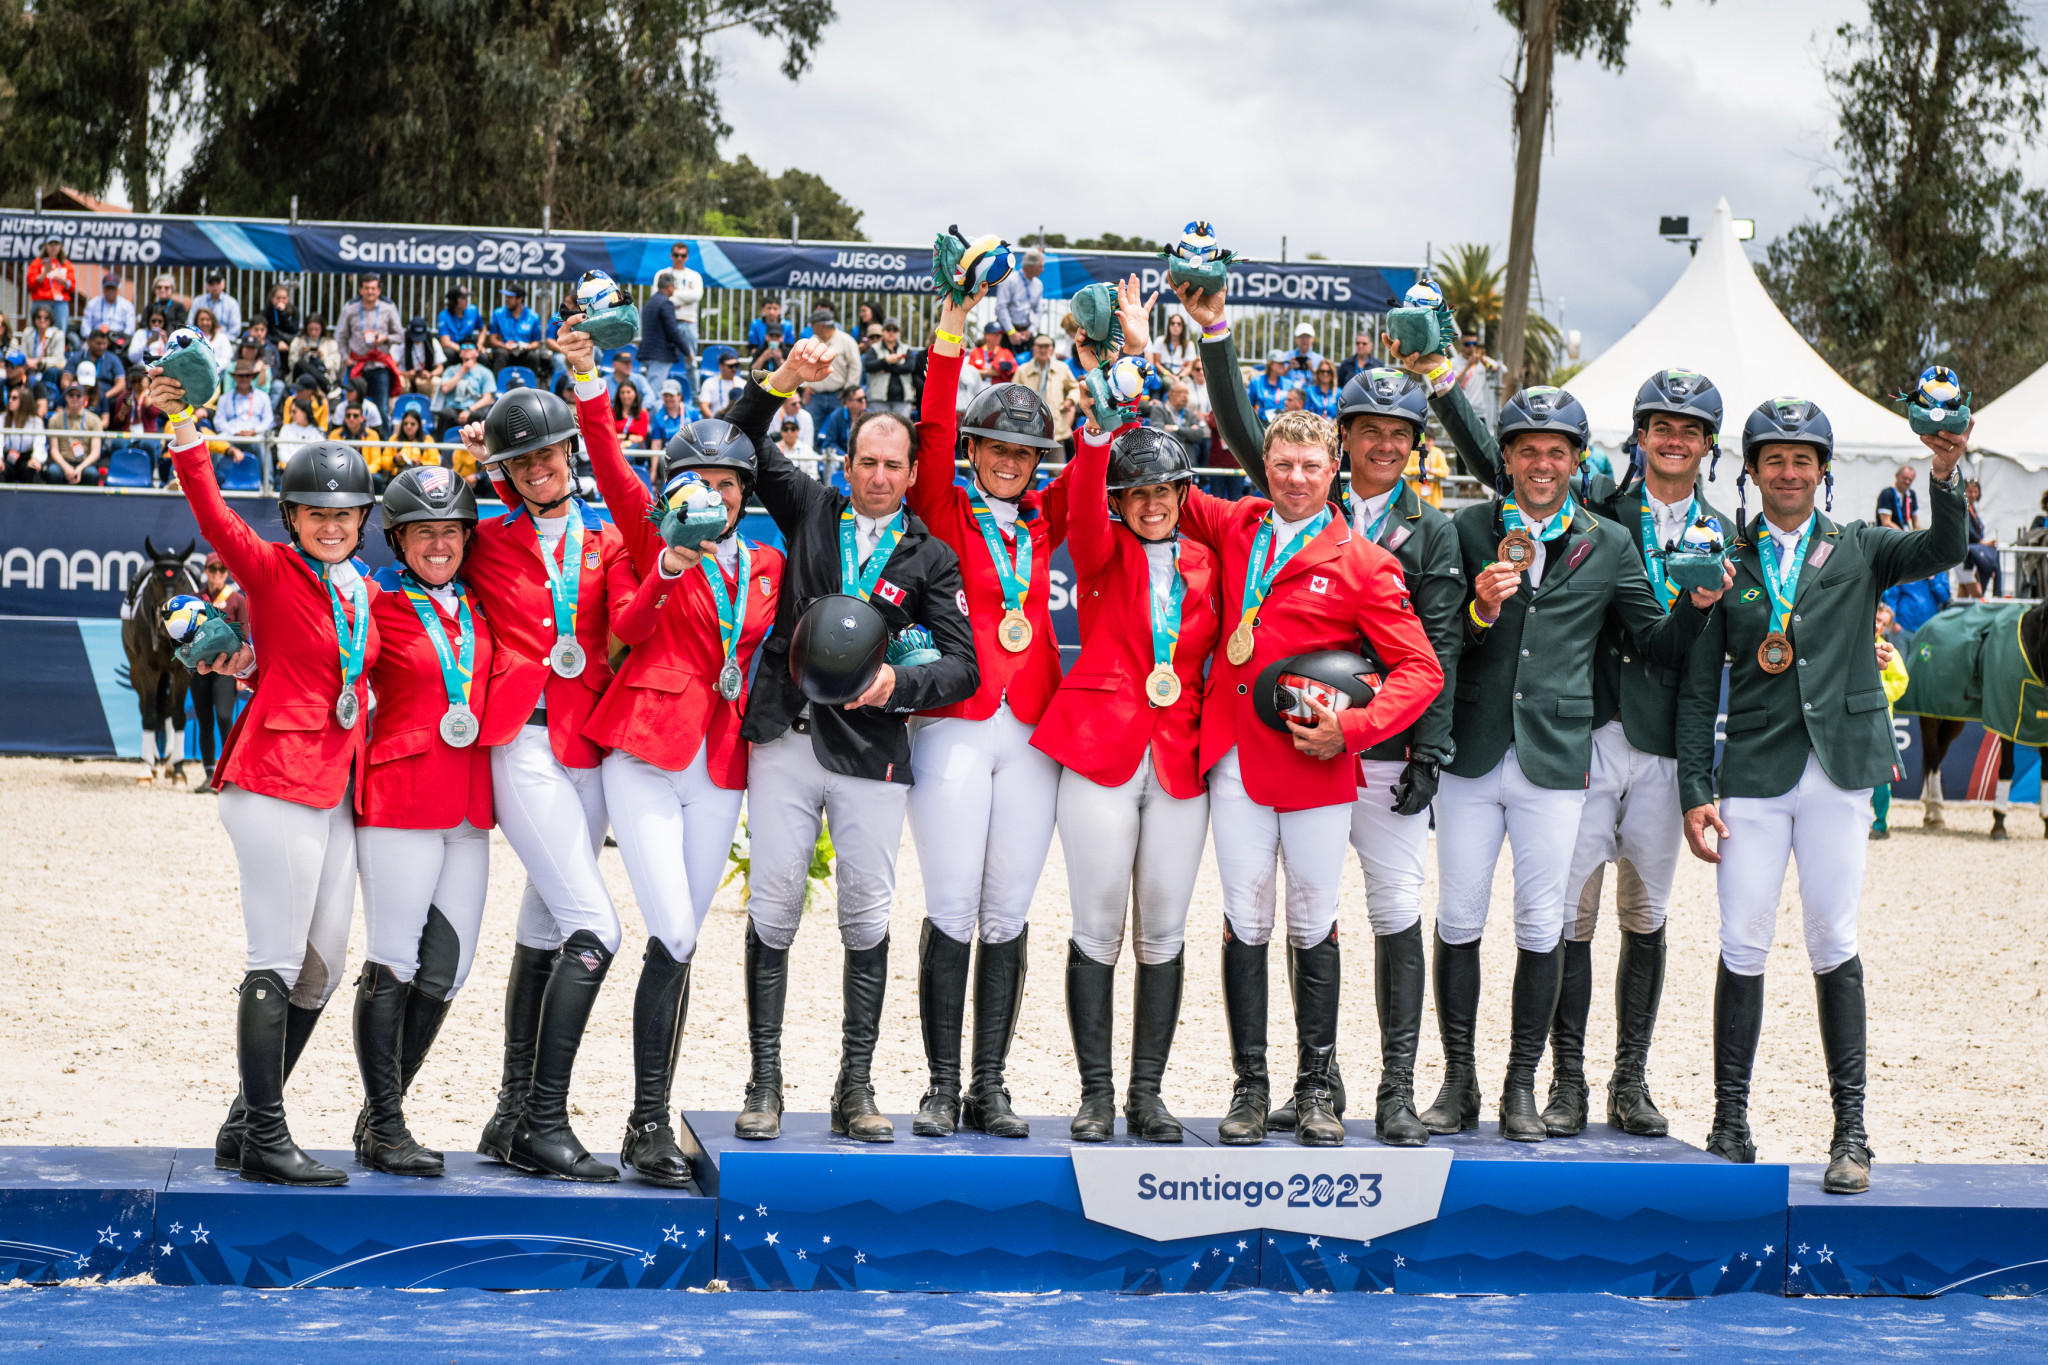 Canada stun US to take team eventing gold at Pan American Games and earn Paris 2024 place